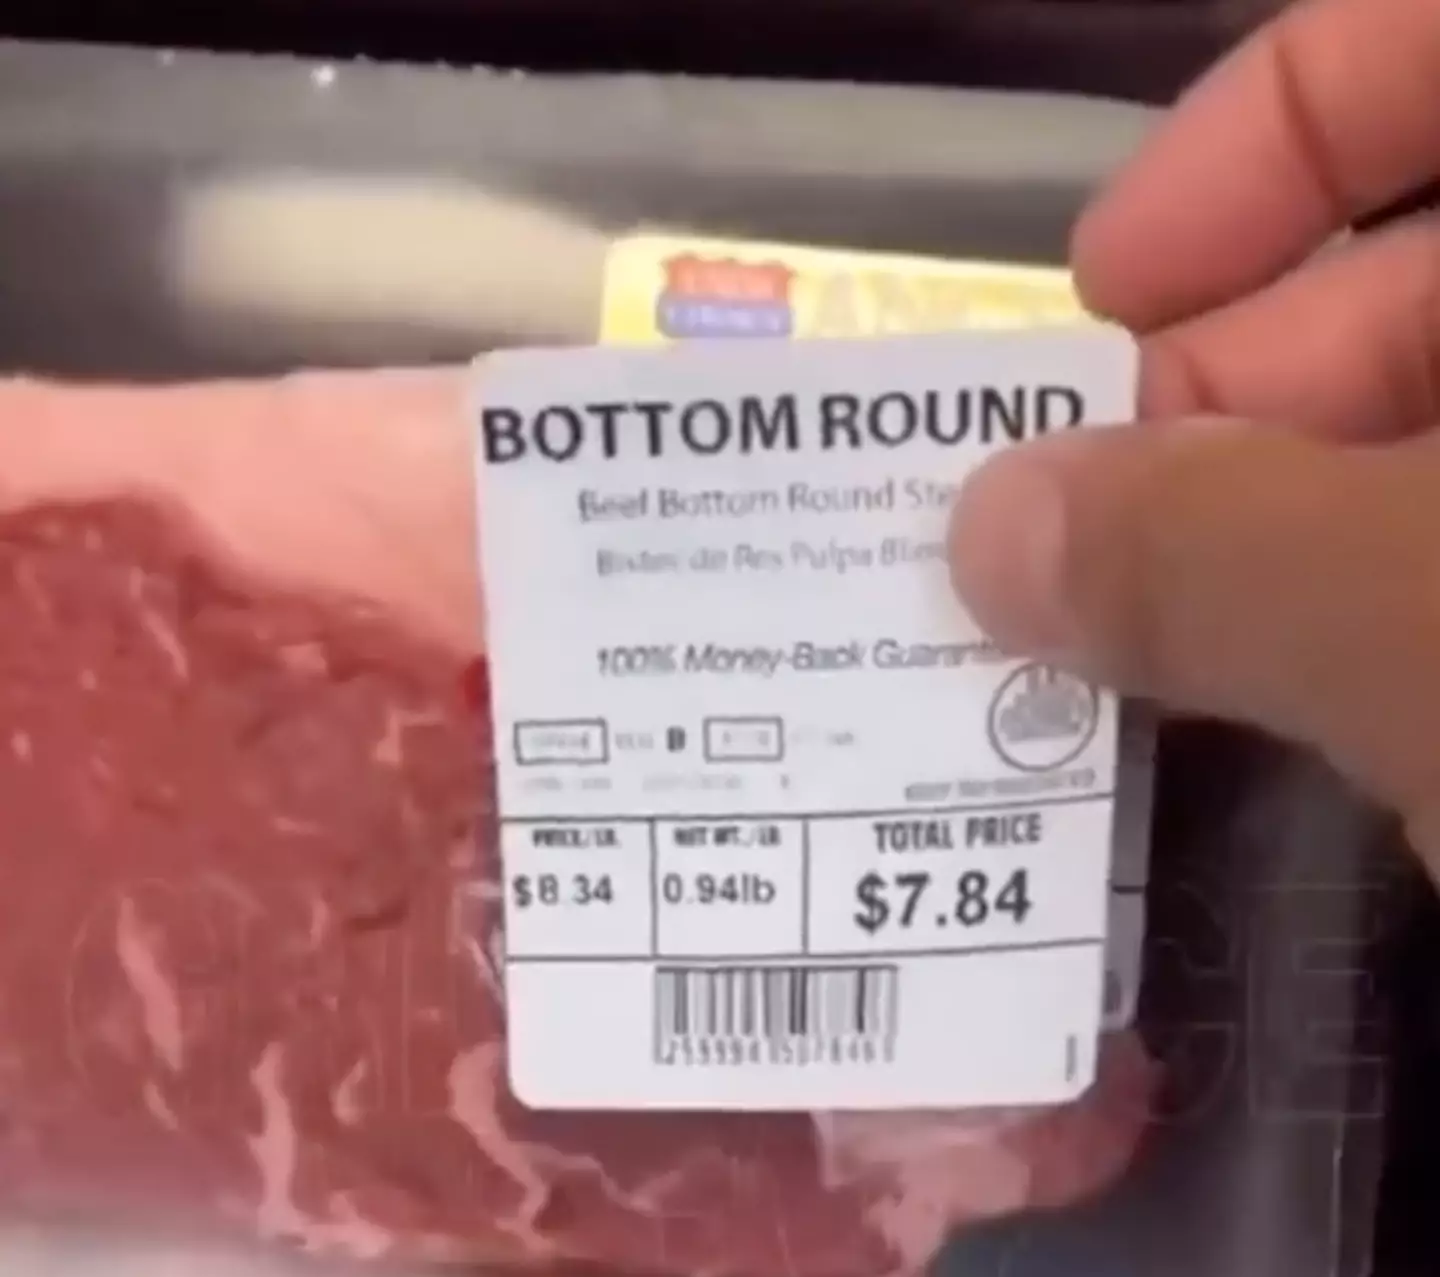 The man replaced the stickers to get a more expensive steak.